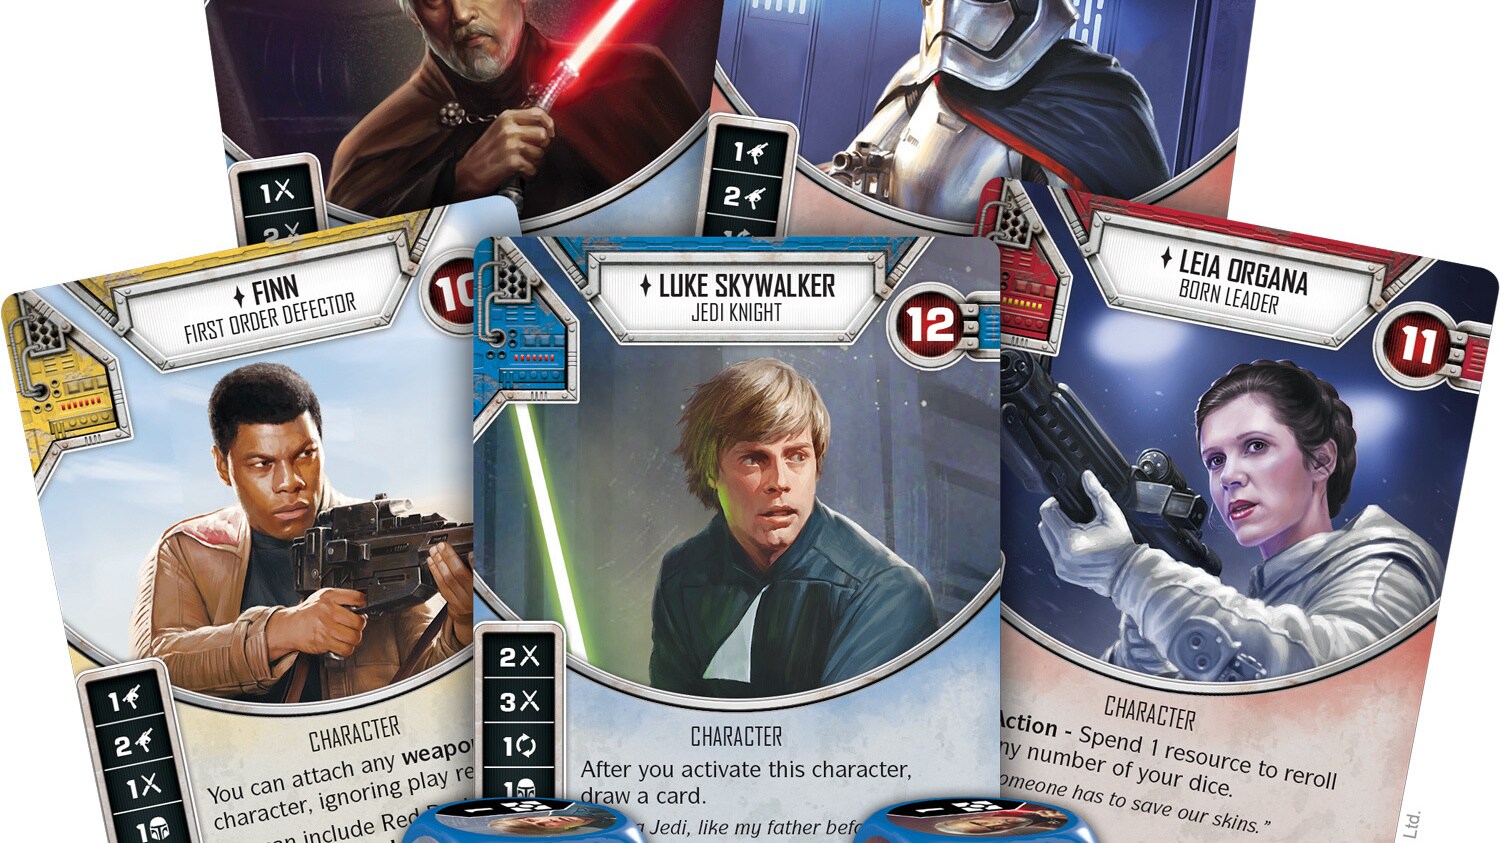 Characters Collide in Star Wars: Destiny from Fantasy Flight Games - Exclusive!